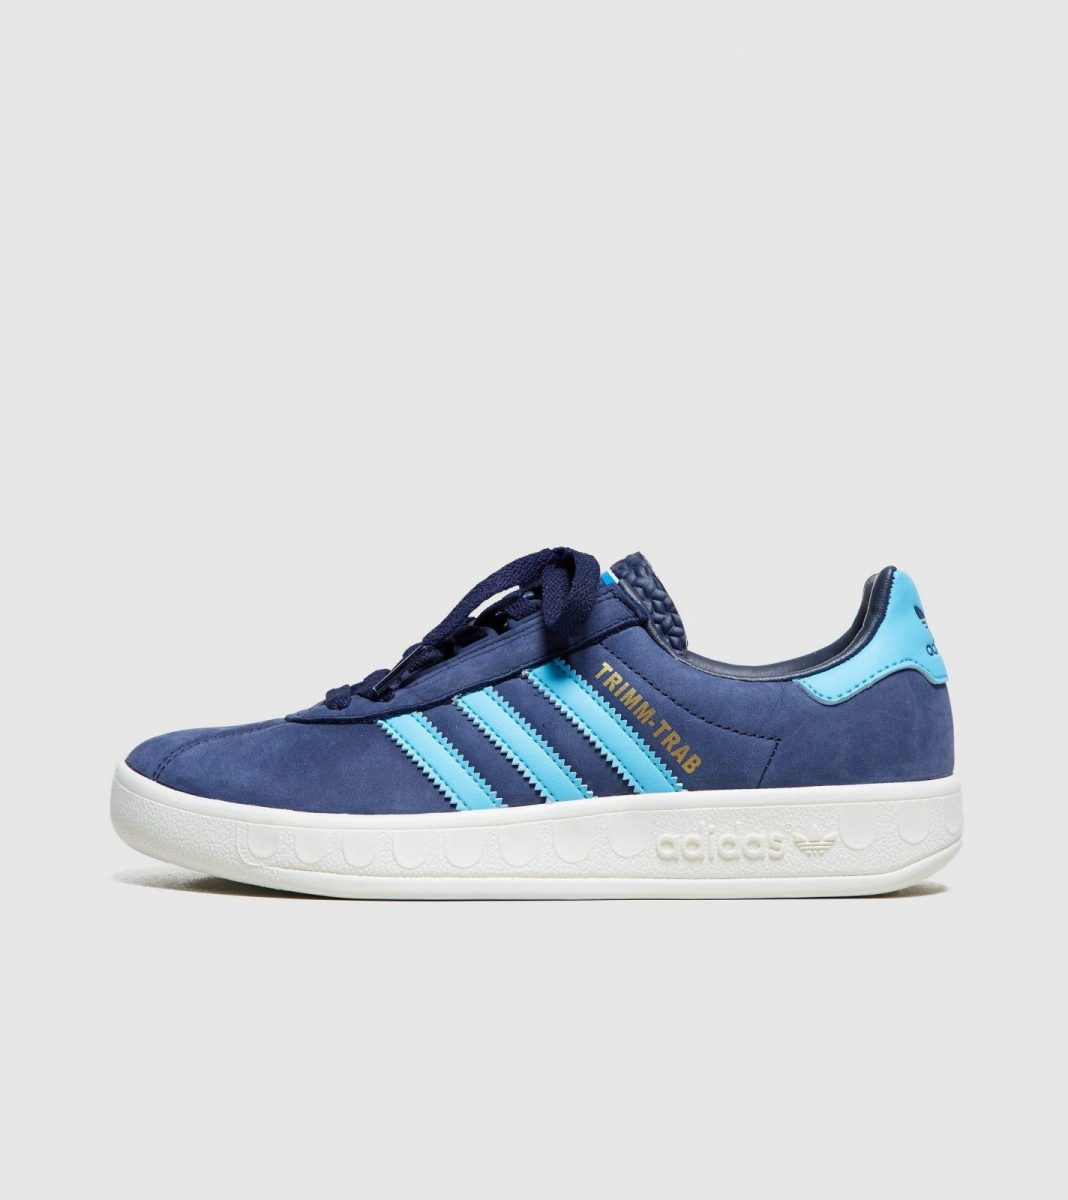 adidas Originals Trimm Trab 'Trimmy' - size? Exclusive Women's (EF2856) -  SNEAKER SEARCH